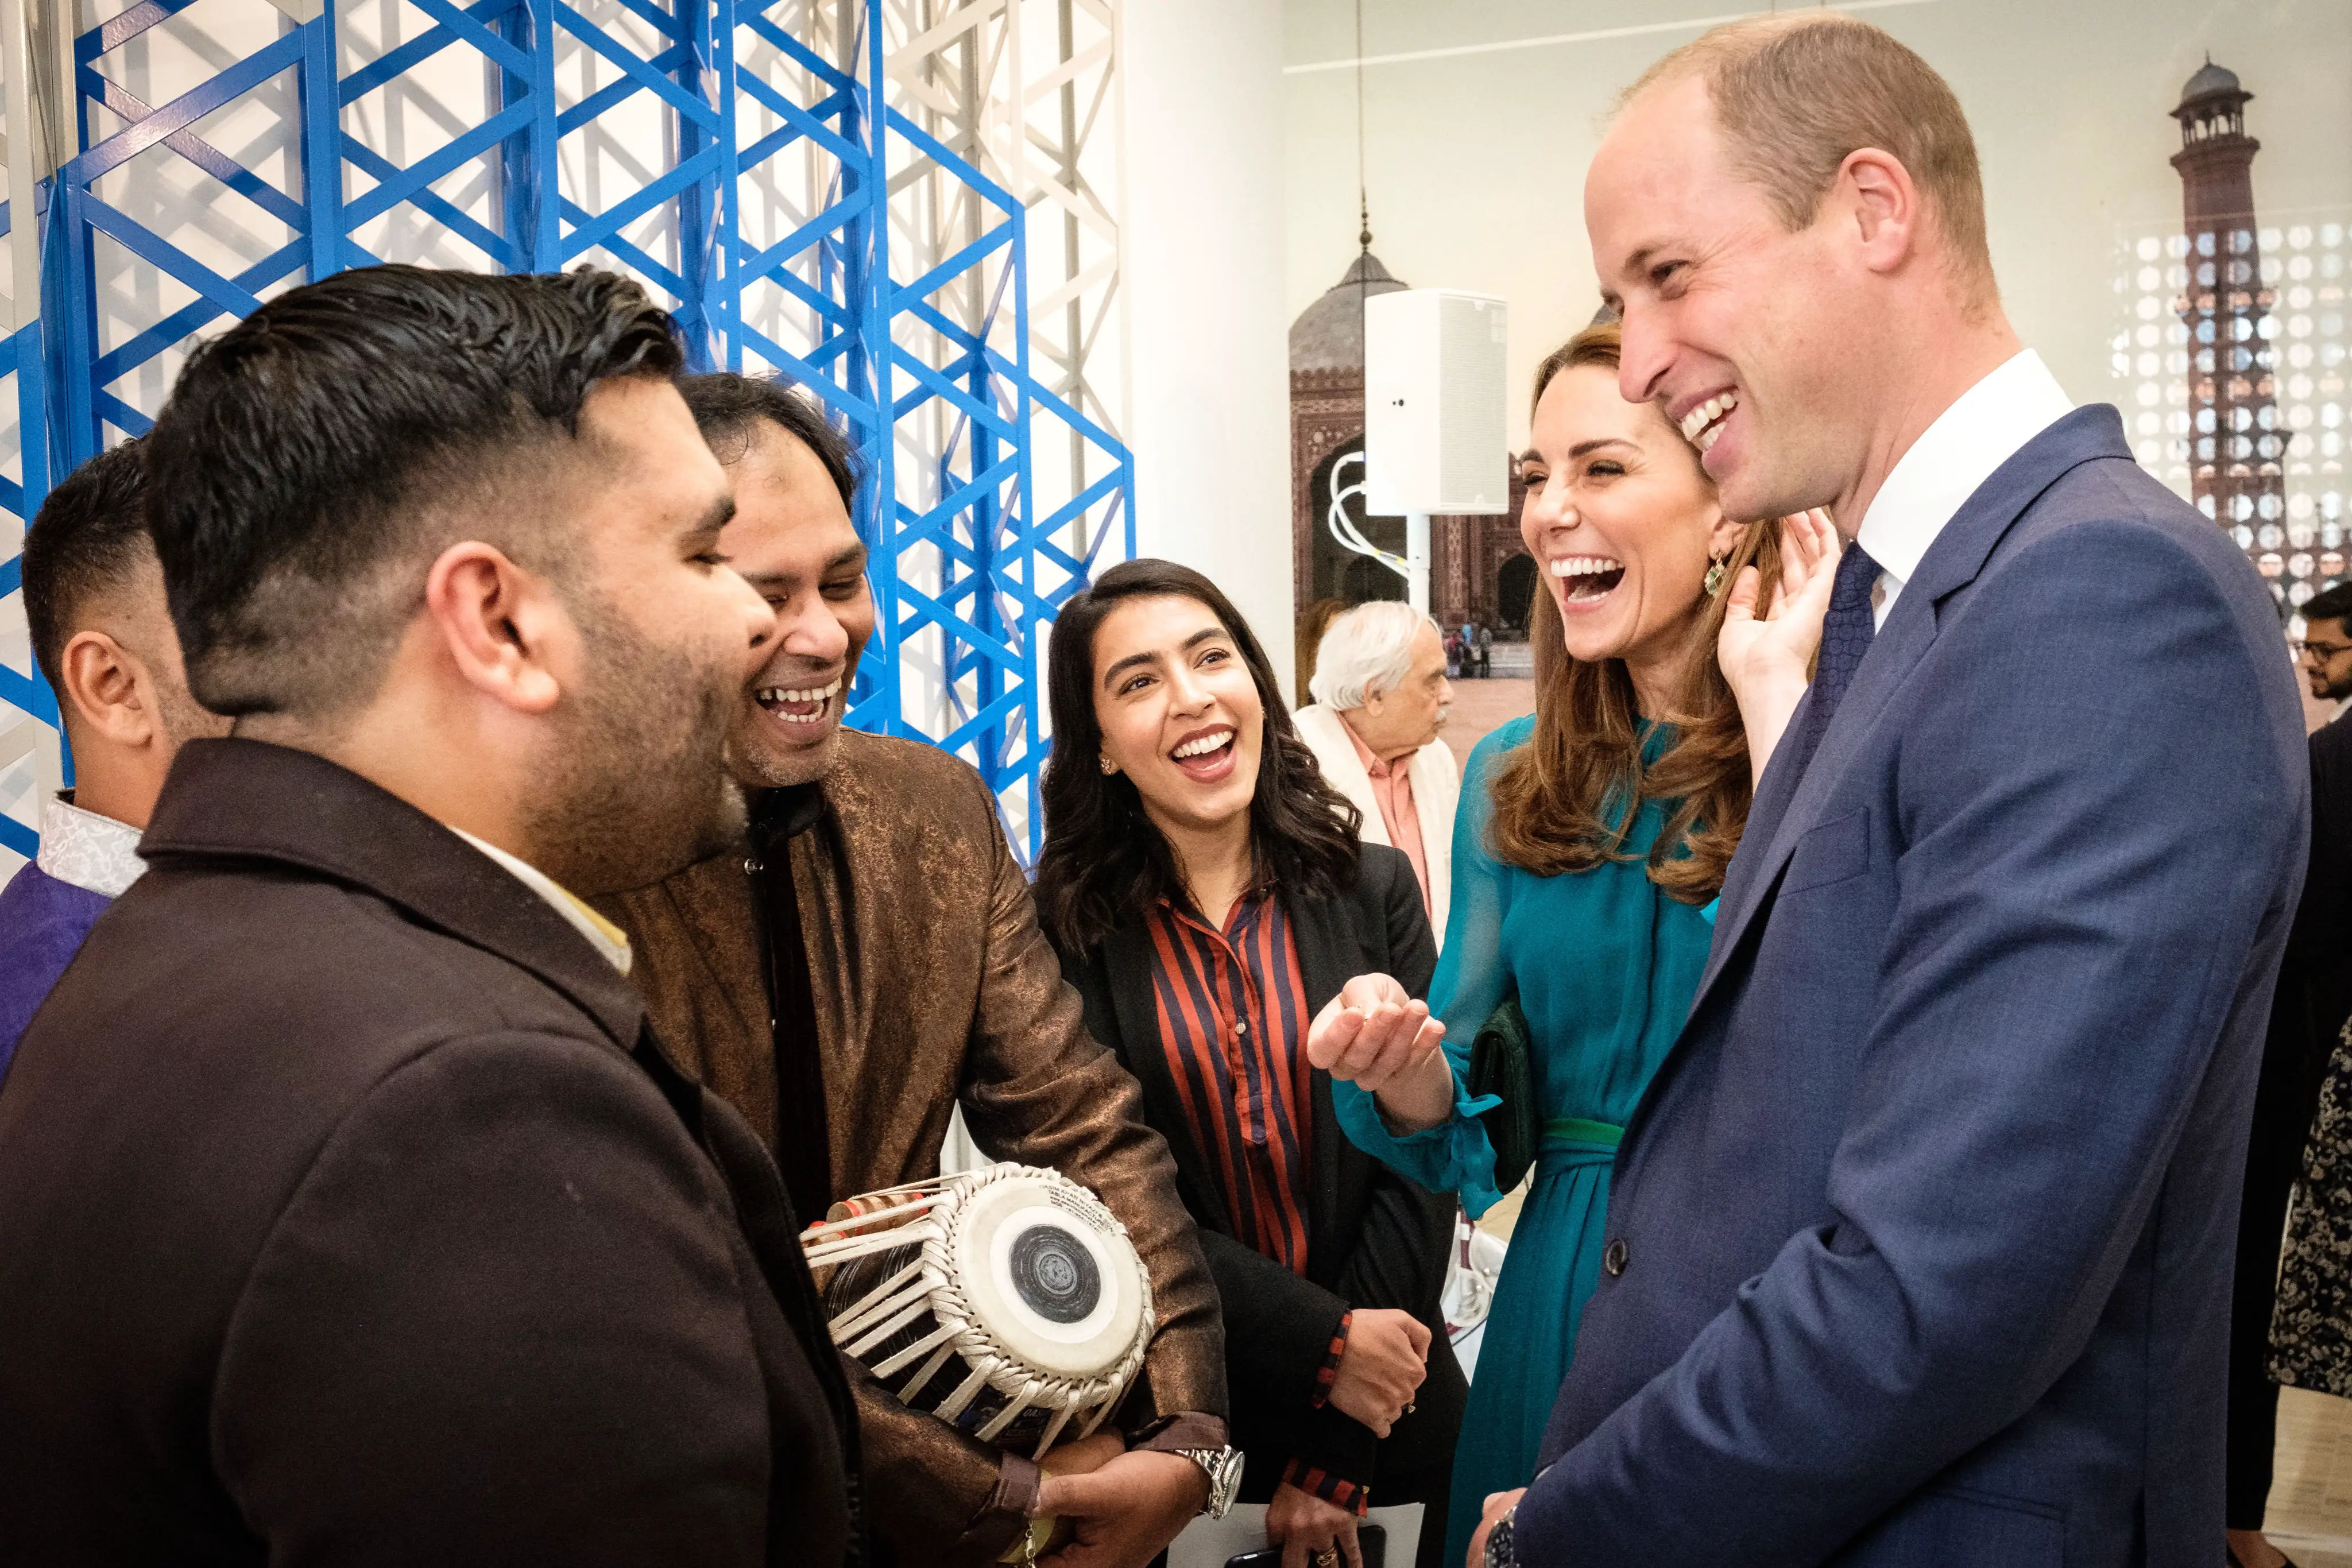 The Duke and Duchess of Cambridge met with young Pakistanis ahead of their Royal tour of Pakistan